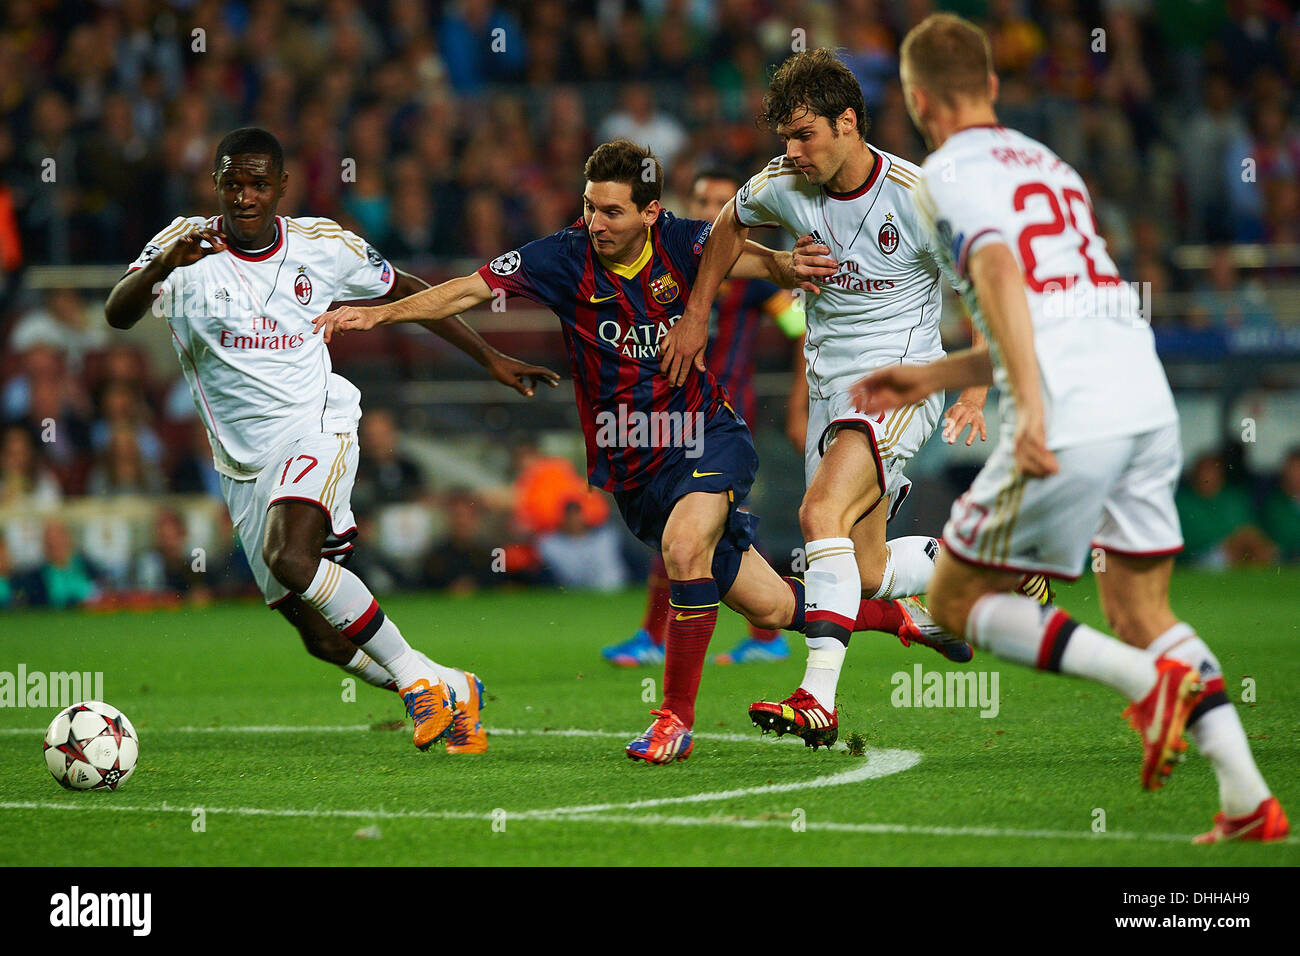 from left Cristian Zapata (AC Milan), Lionel Messi (FC Barcelona), Andrea Poli (AC Milan), during the Champions League soccer match between FC Barcelona and AC Milan, at the Camp Nou stadium in Barcelona, Spain, wednesday, november 6, 2013. Foto: S.Lau Stock Photo